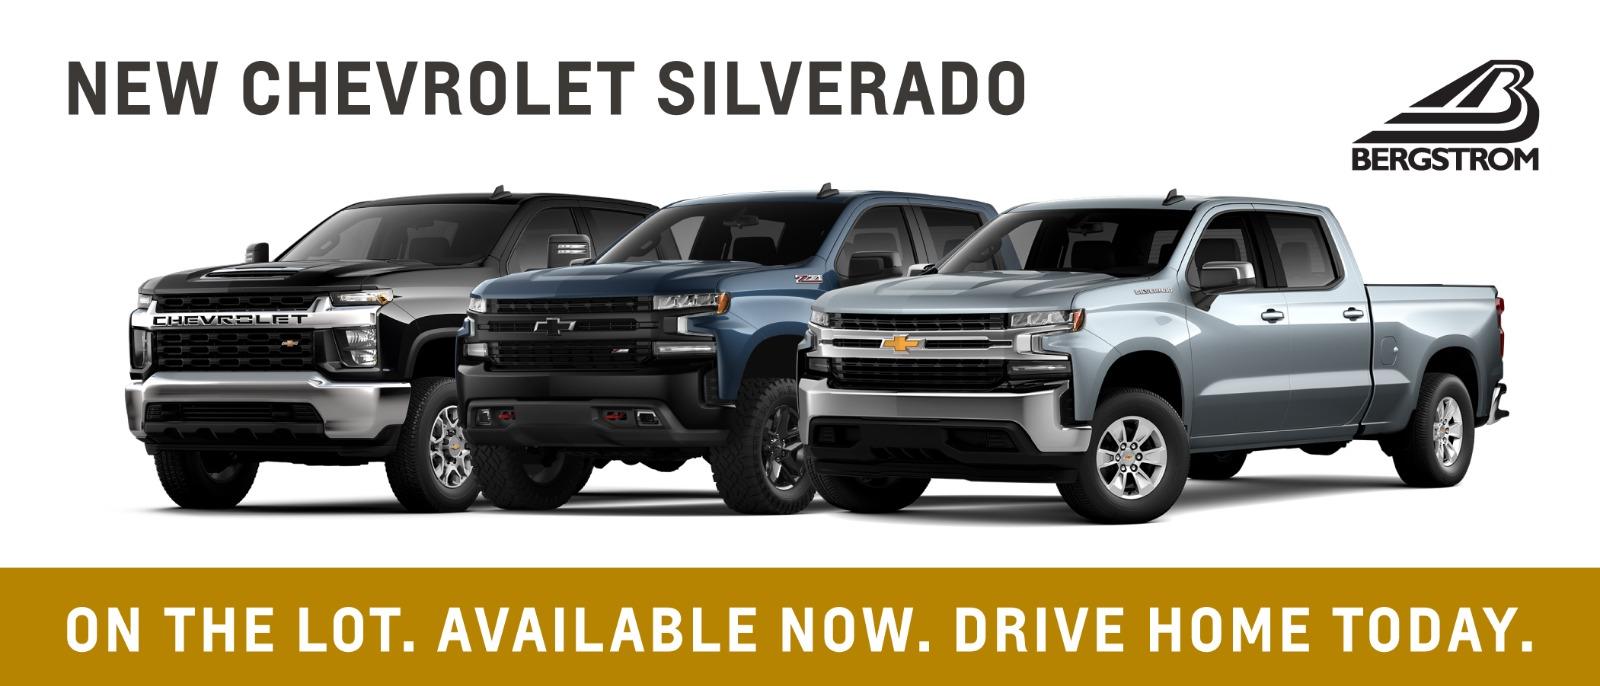 New Silverados On the lot, available Now Drive home today